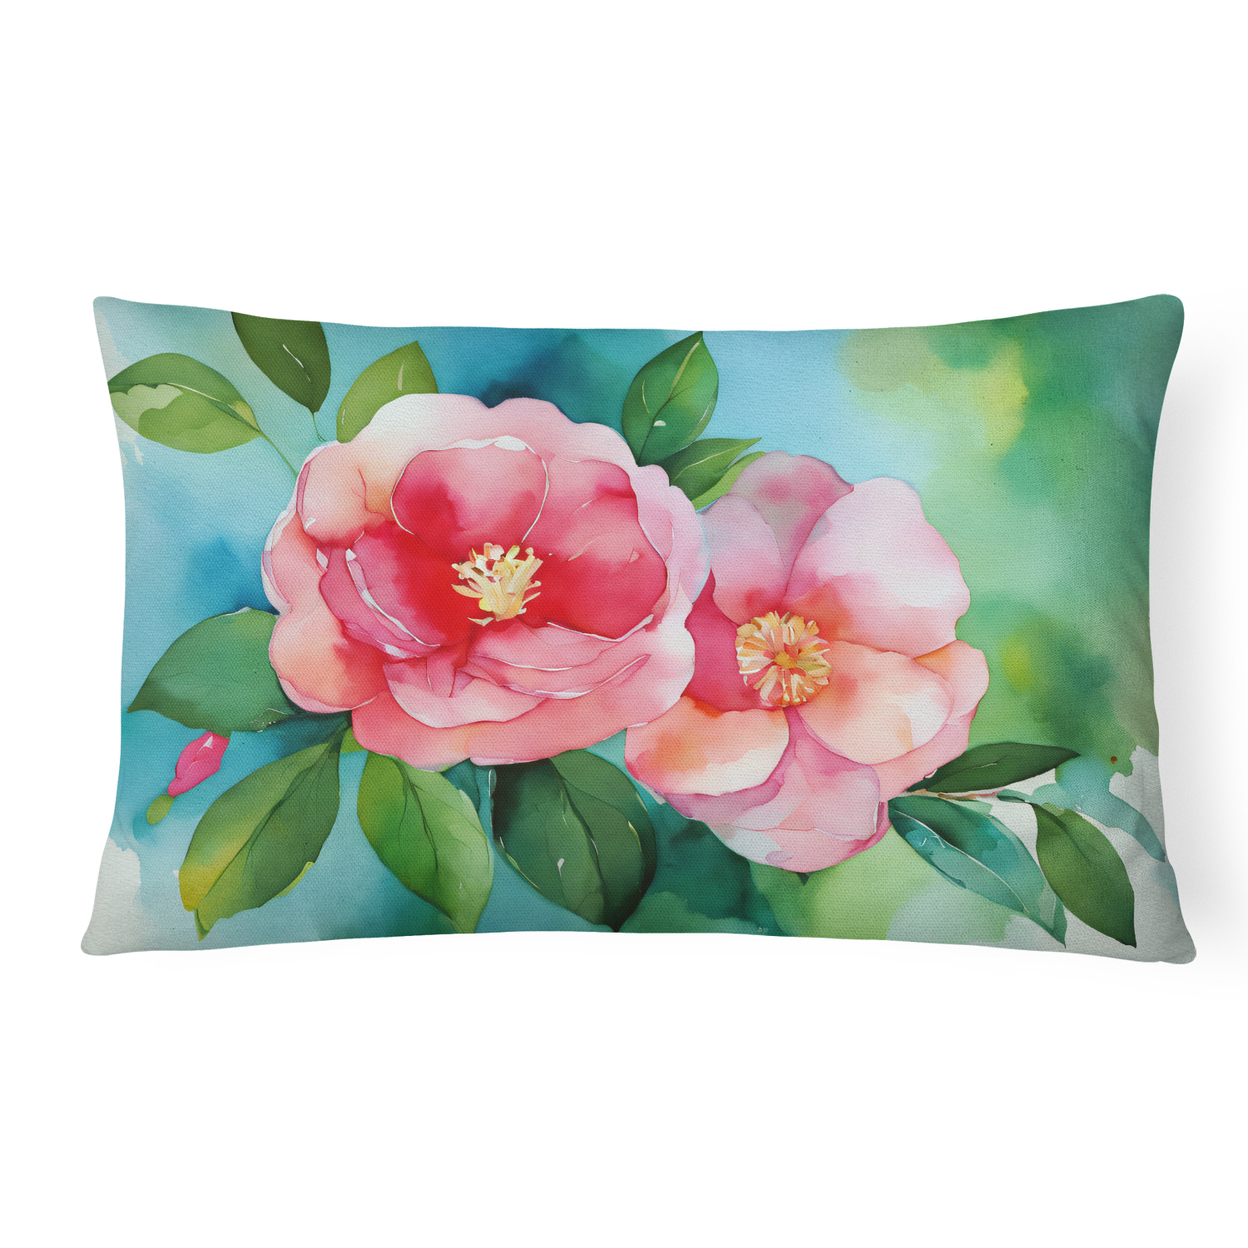 Alabama Camellia in Watercolor Fabric Decorative Pillow 12 in x 16 in - image 1 of 4